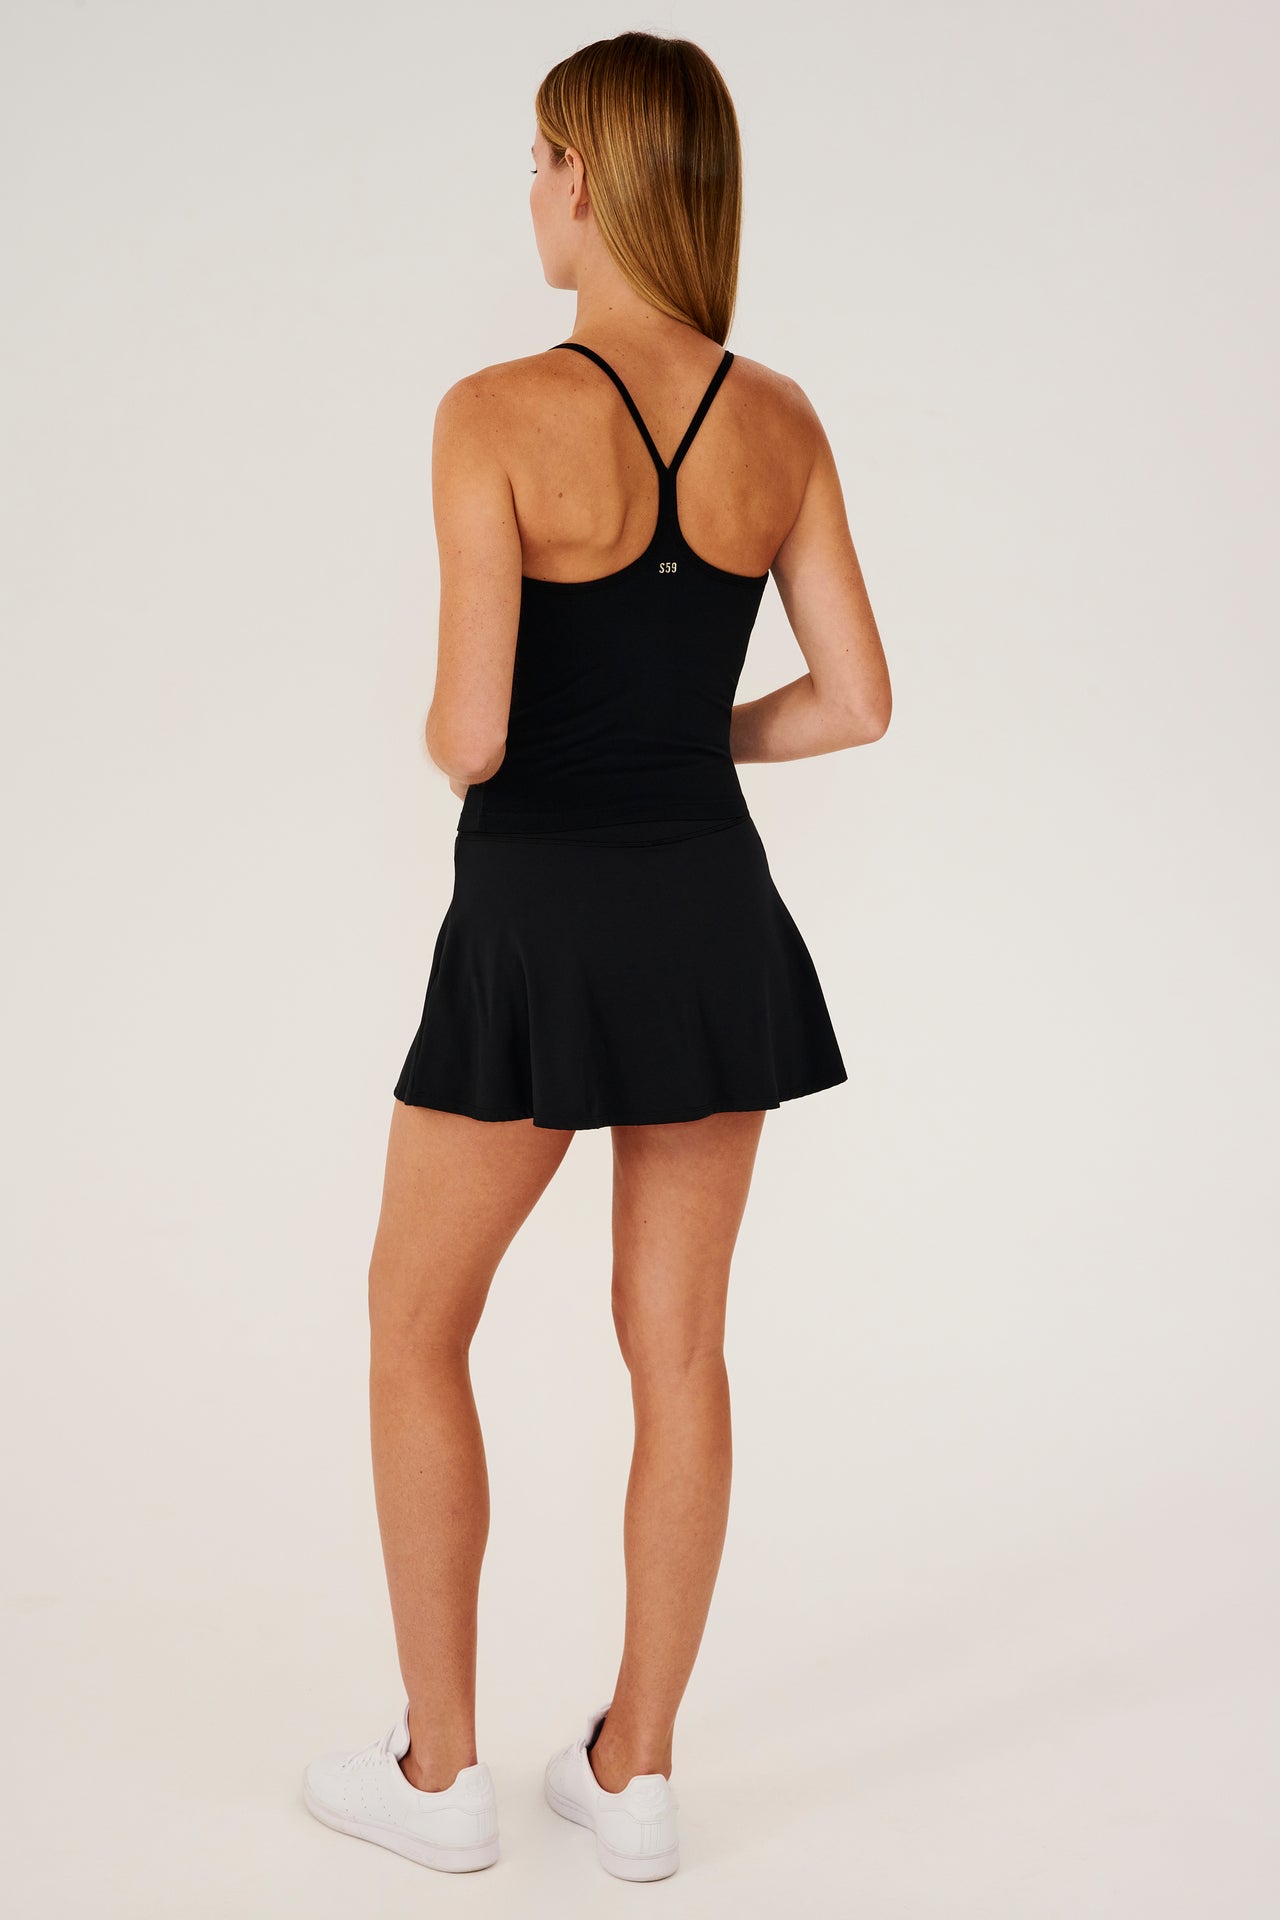 Full back view of girl wearing black spaghetti strap tank top with black skirt and white shoes